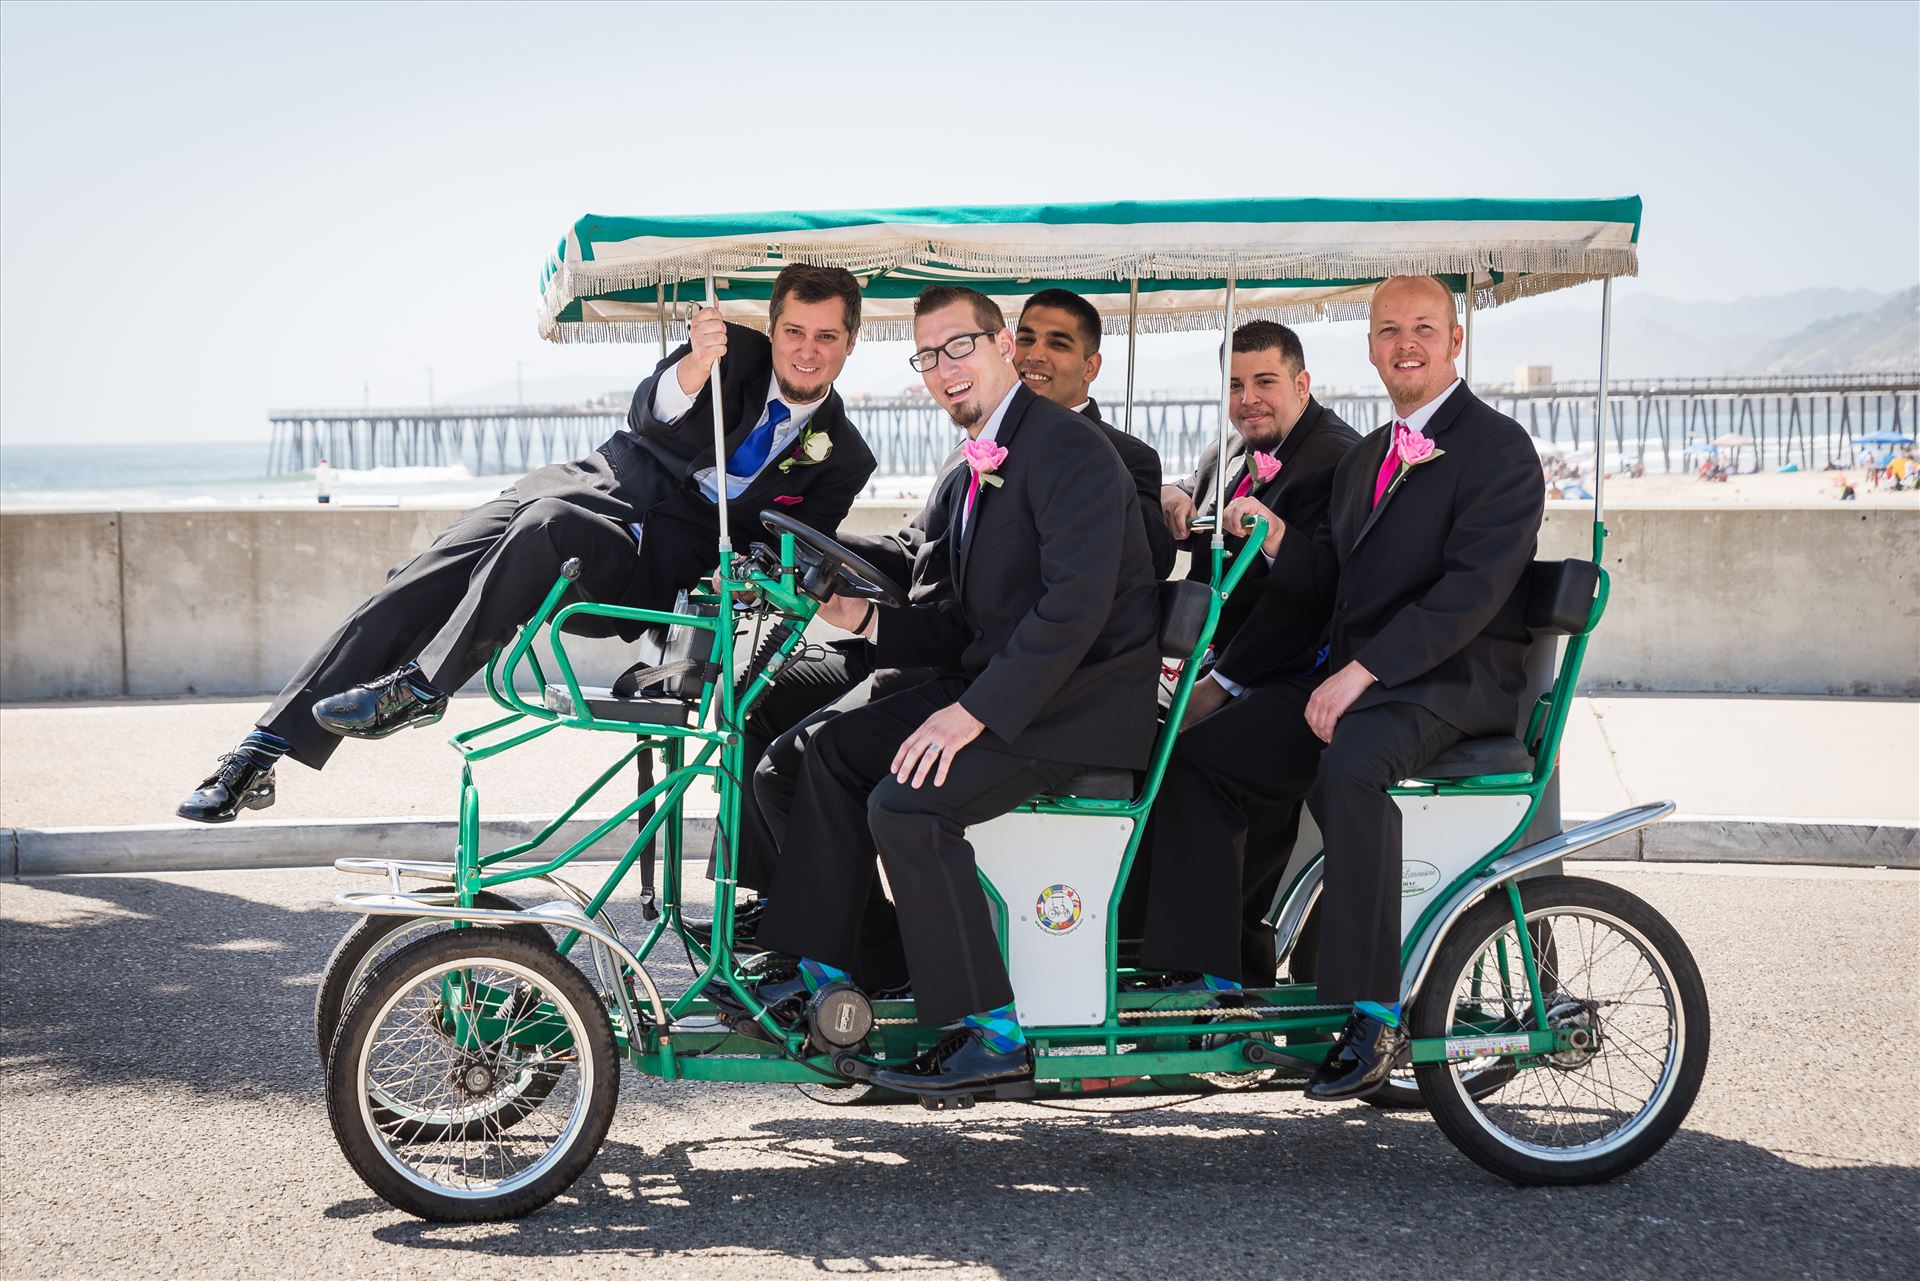 Jessica and Michael 23 Sea Venture Resort and Spa Wedding Photography by Mirror's Edge Photography in Pismo Beach, California. Groom and Groomsmen in cart by Sarah Williams